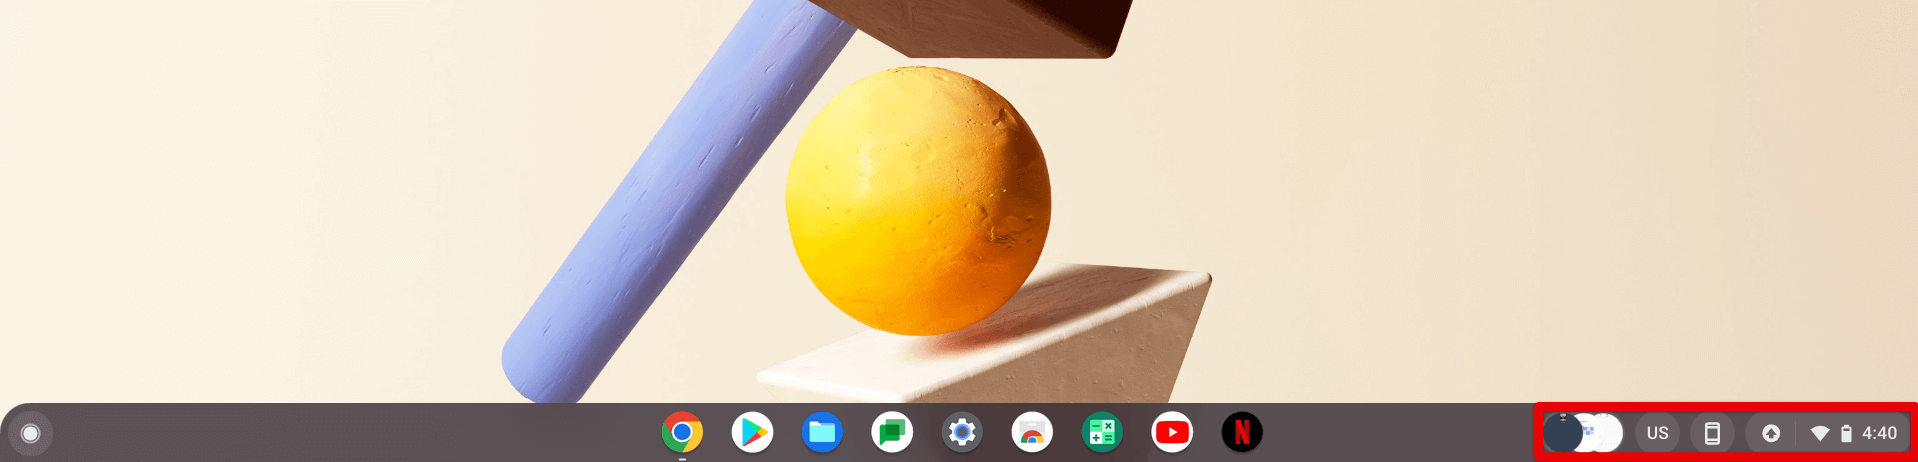 The Chrome OS status bar and all its inclusions